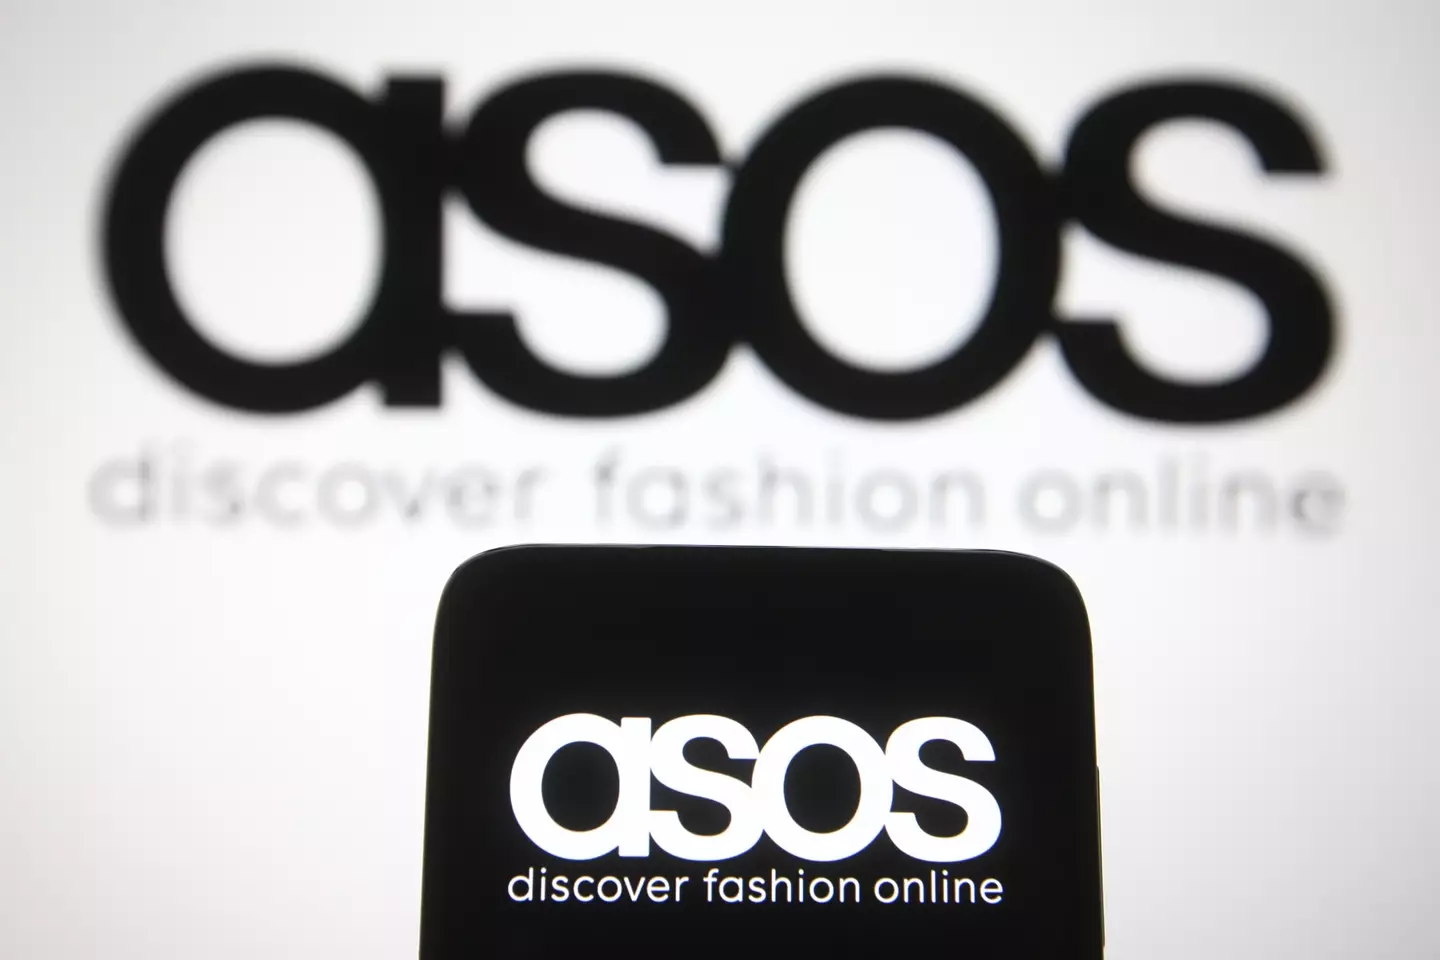 Alyssa claimed that ASOS banned her over the complaint.